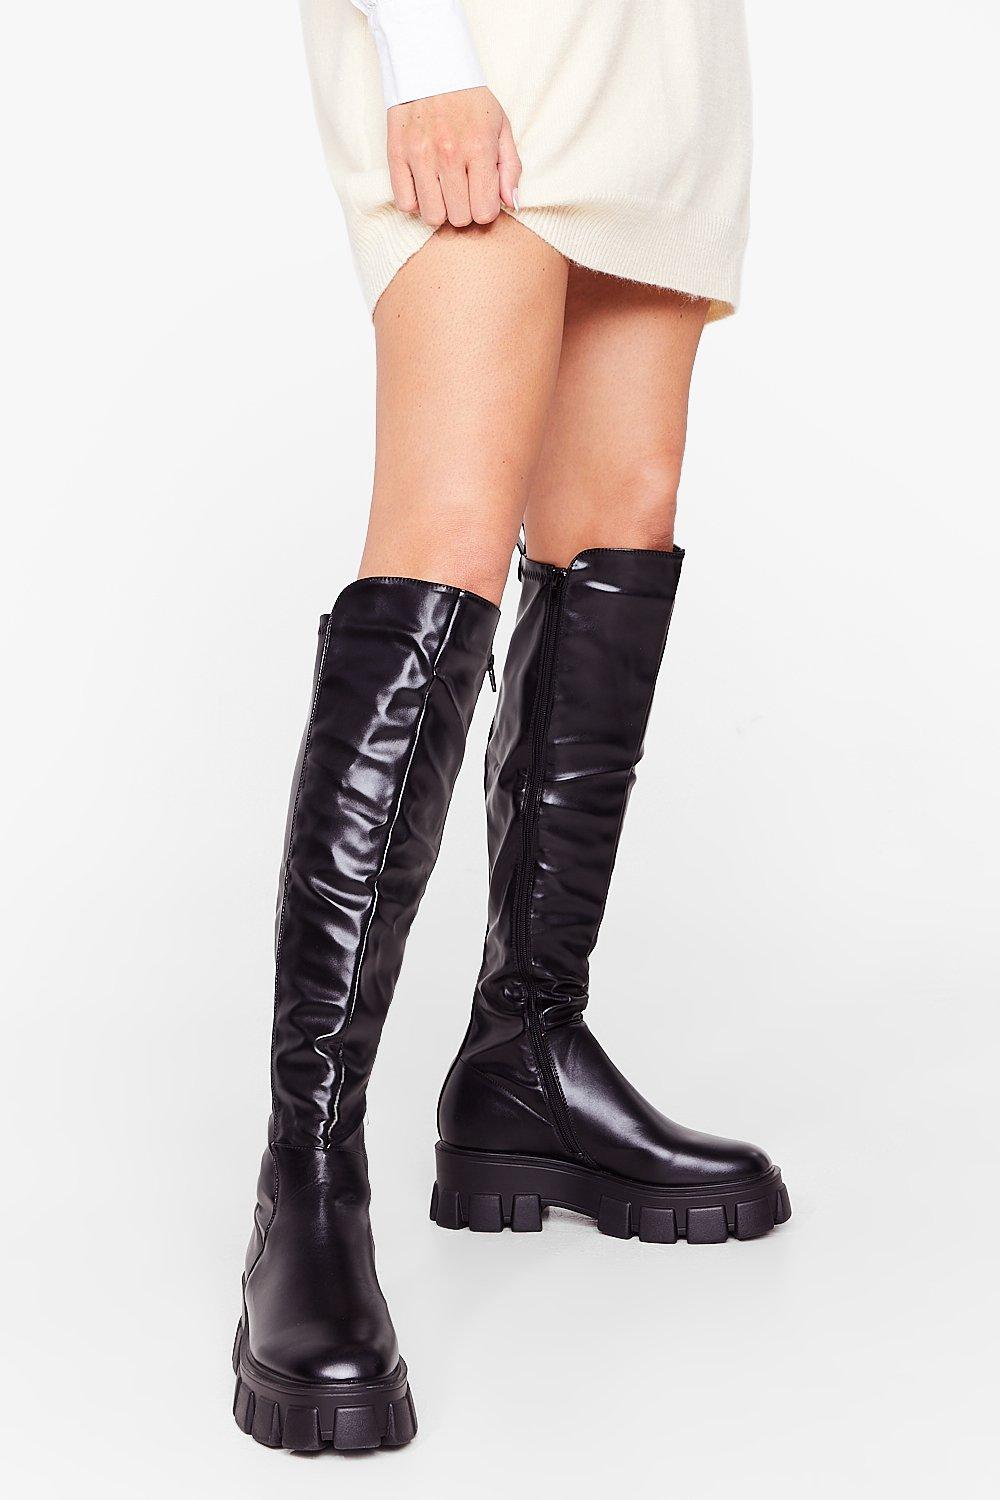 yarn Discolor Secretary Faux Leather Chunky Flat Knee High Boots | Nasty Gal